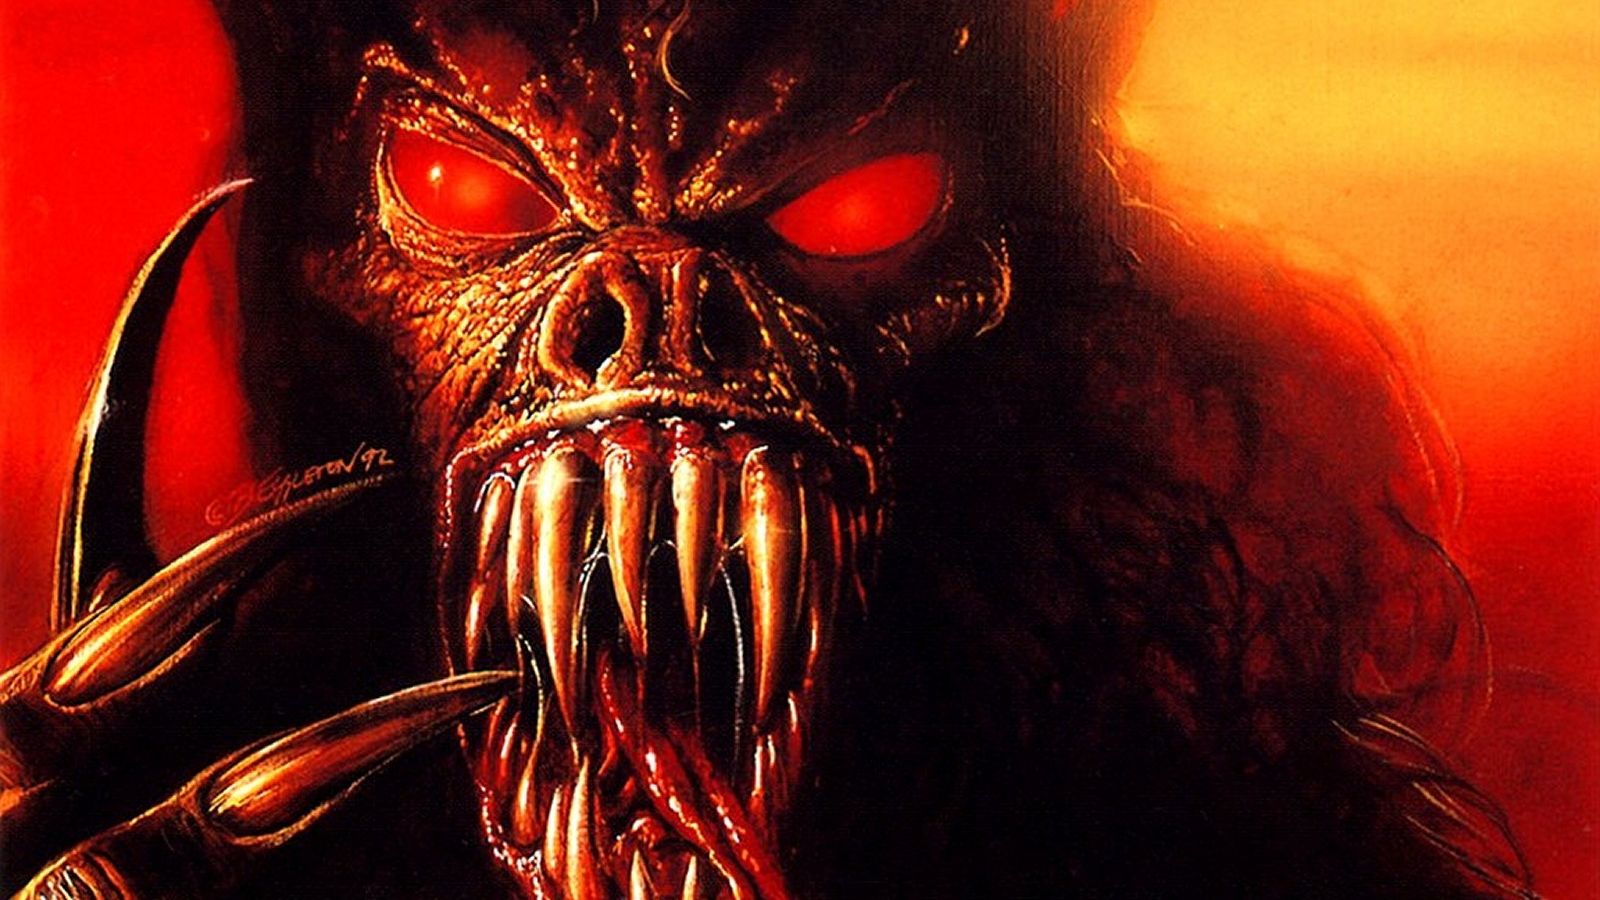 Tons of awesome scary monster wallpapers to download for free. 